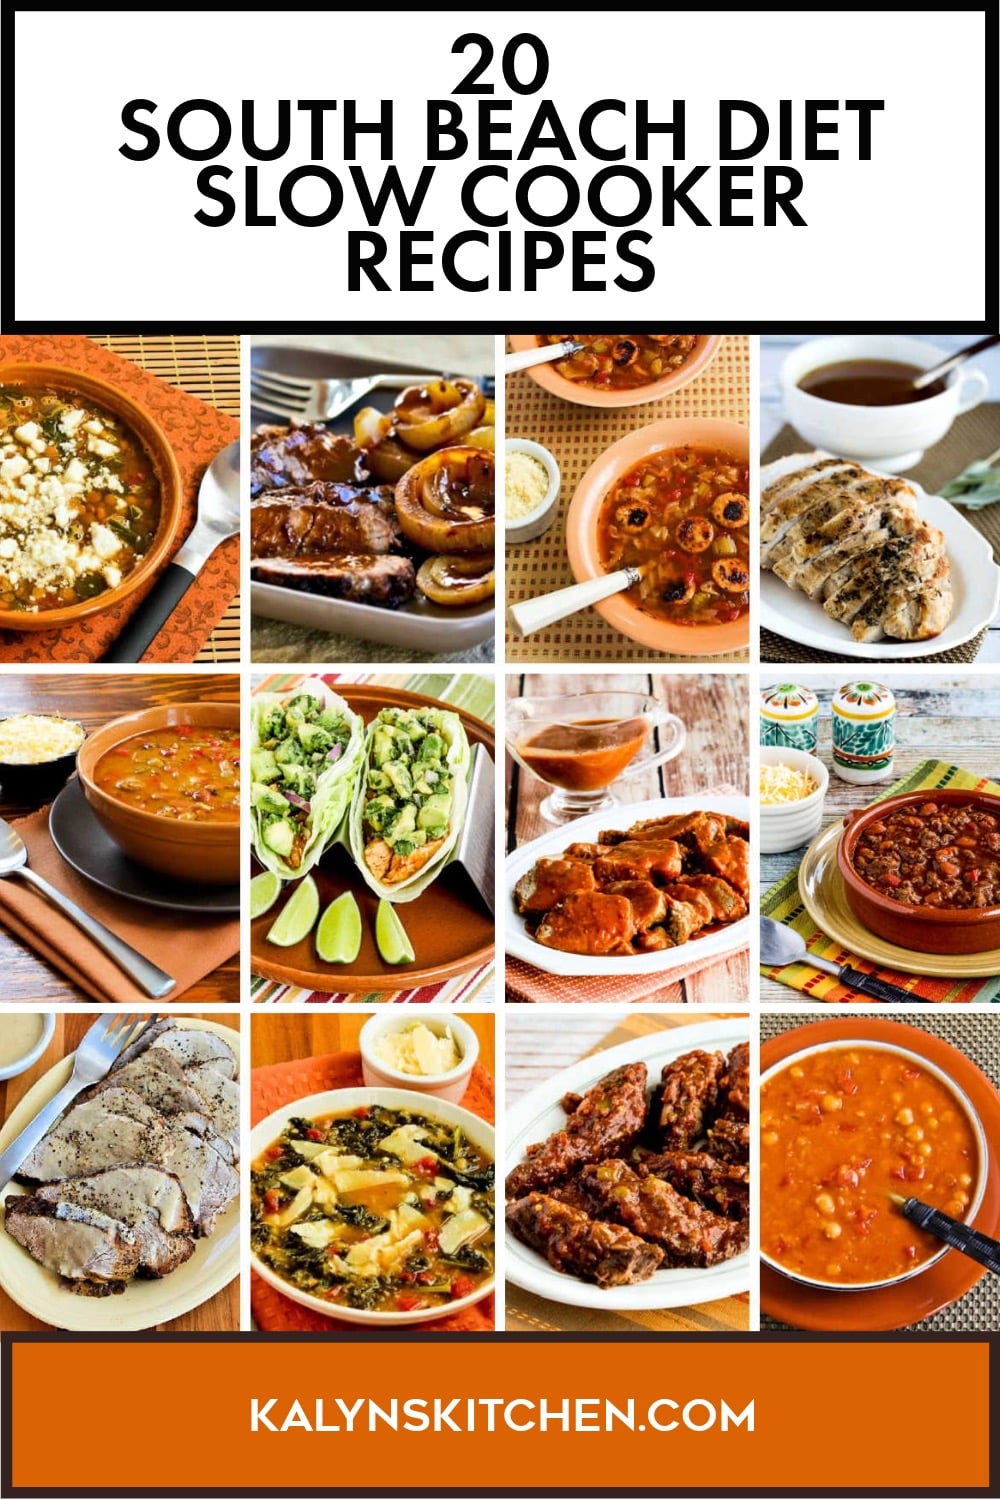 Pinterest image of 20 South Beach Diet Slow Cooker Recipes